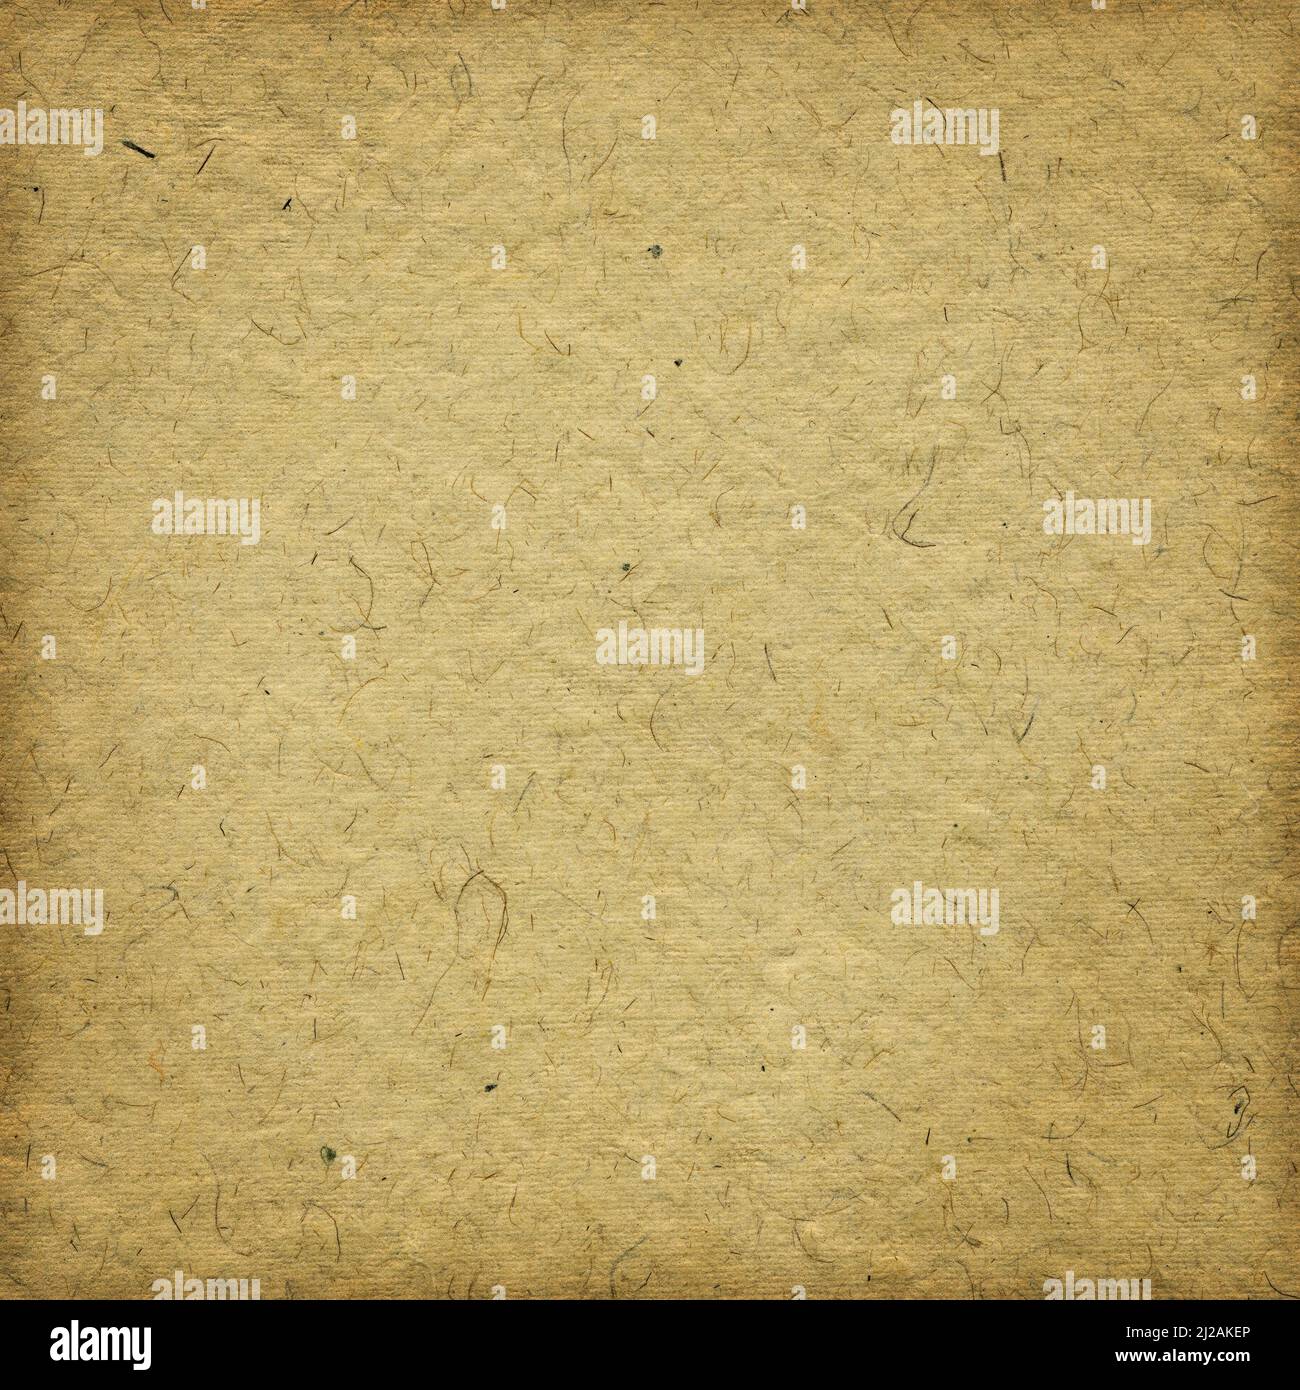 Grunge beige handmade paper background with frame Stock Photo